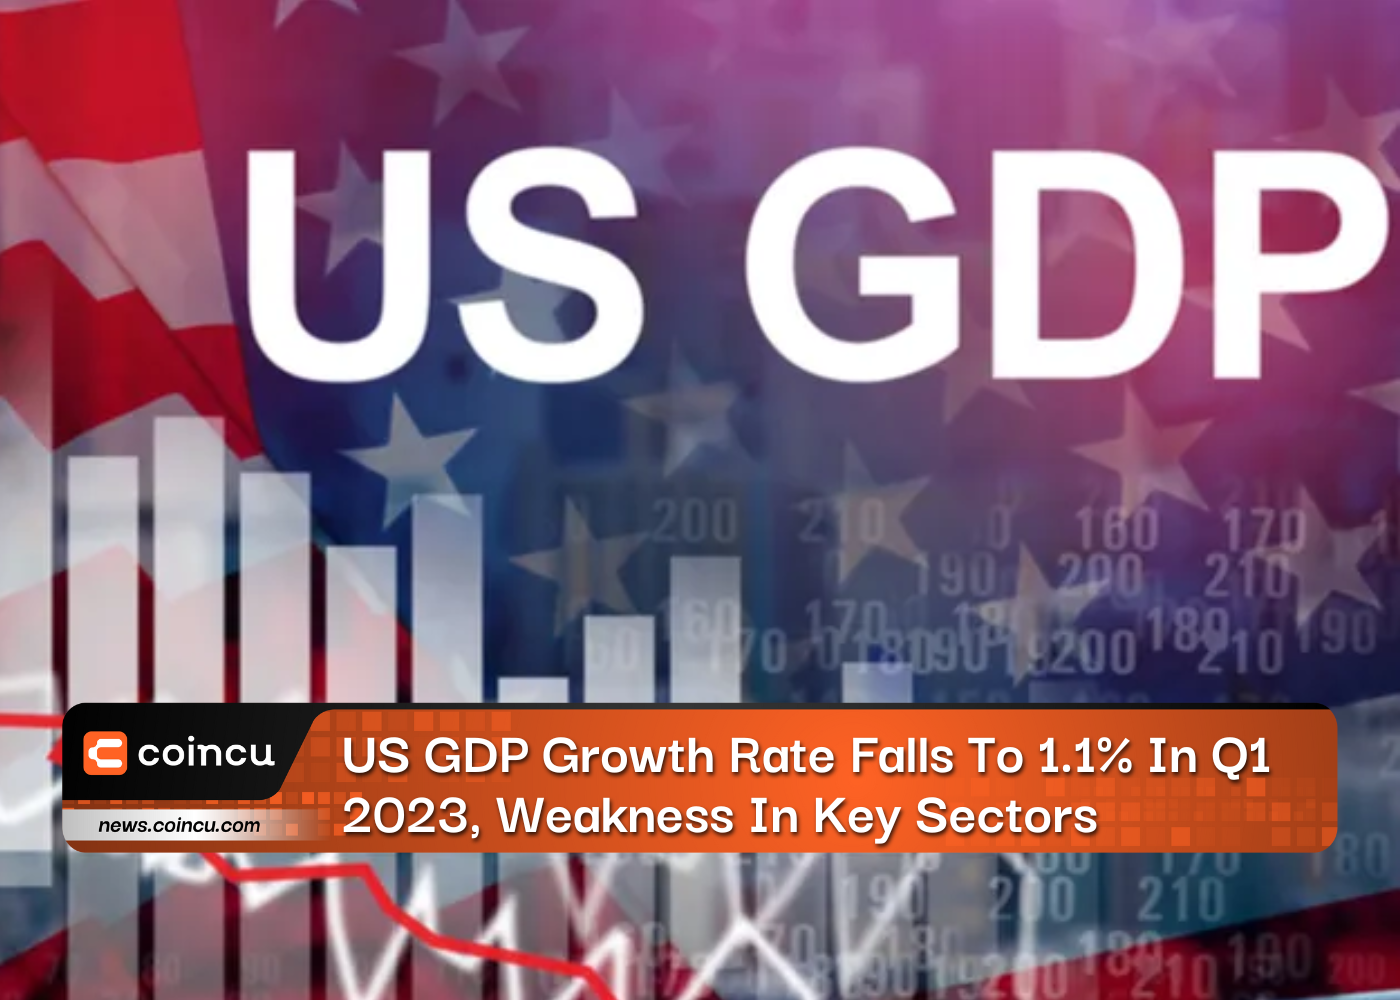 US GDP Growth Rate Falls To 1.1% In Q1 2023, Weakness In Key Sectors